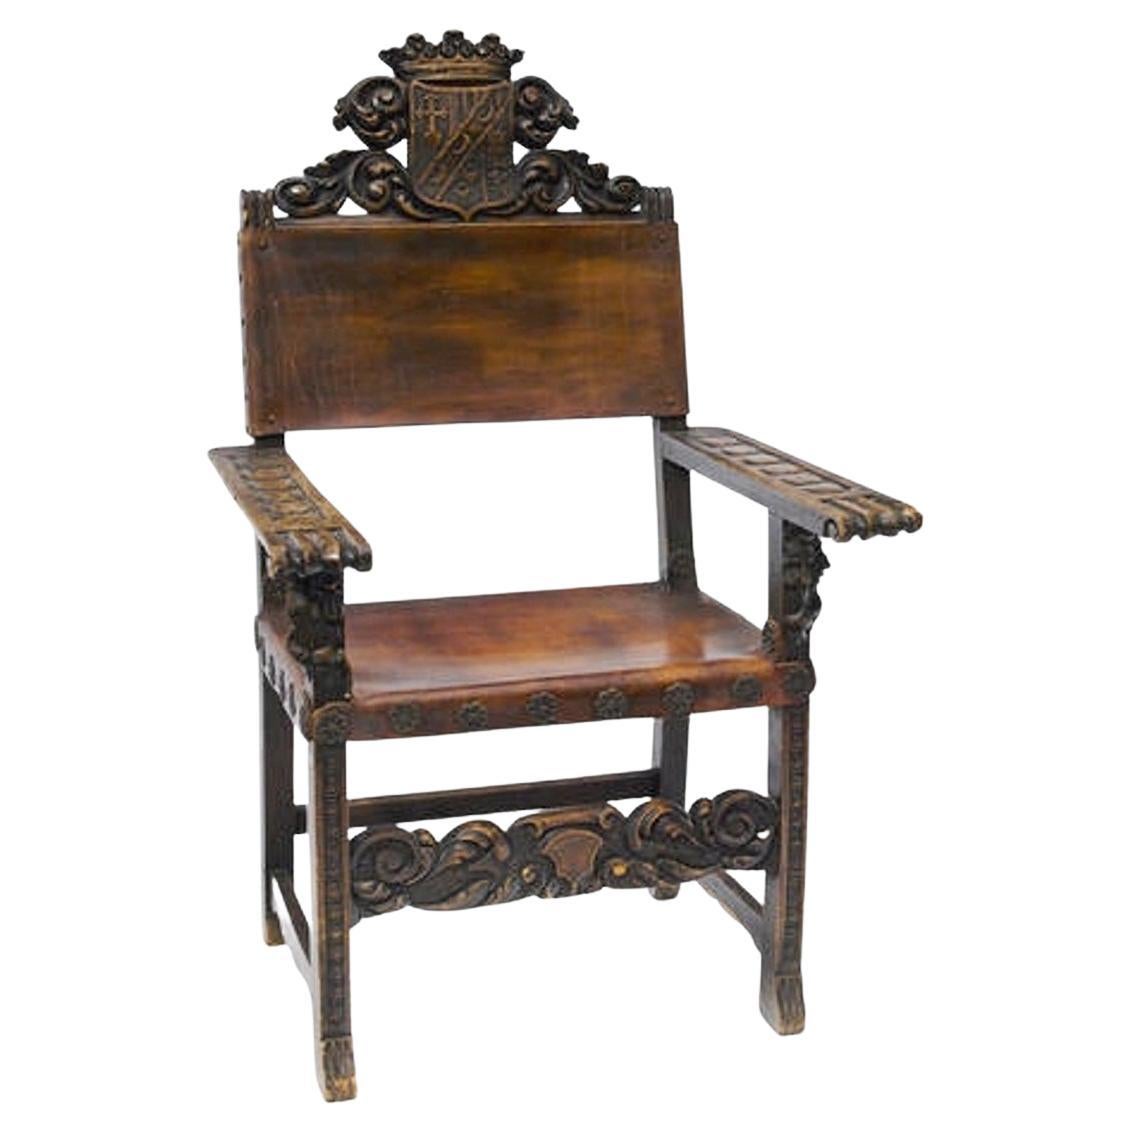 Spanish Baroque walnut armchair with crown and coat of arm, Early 19c  